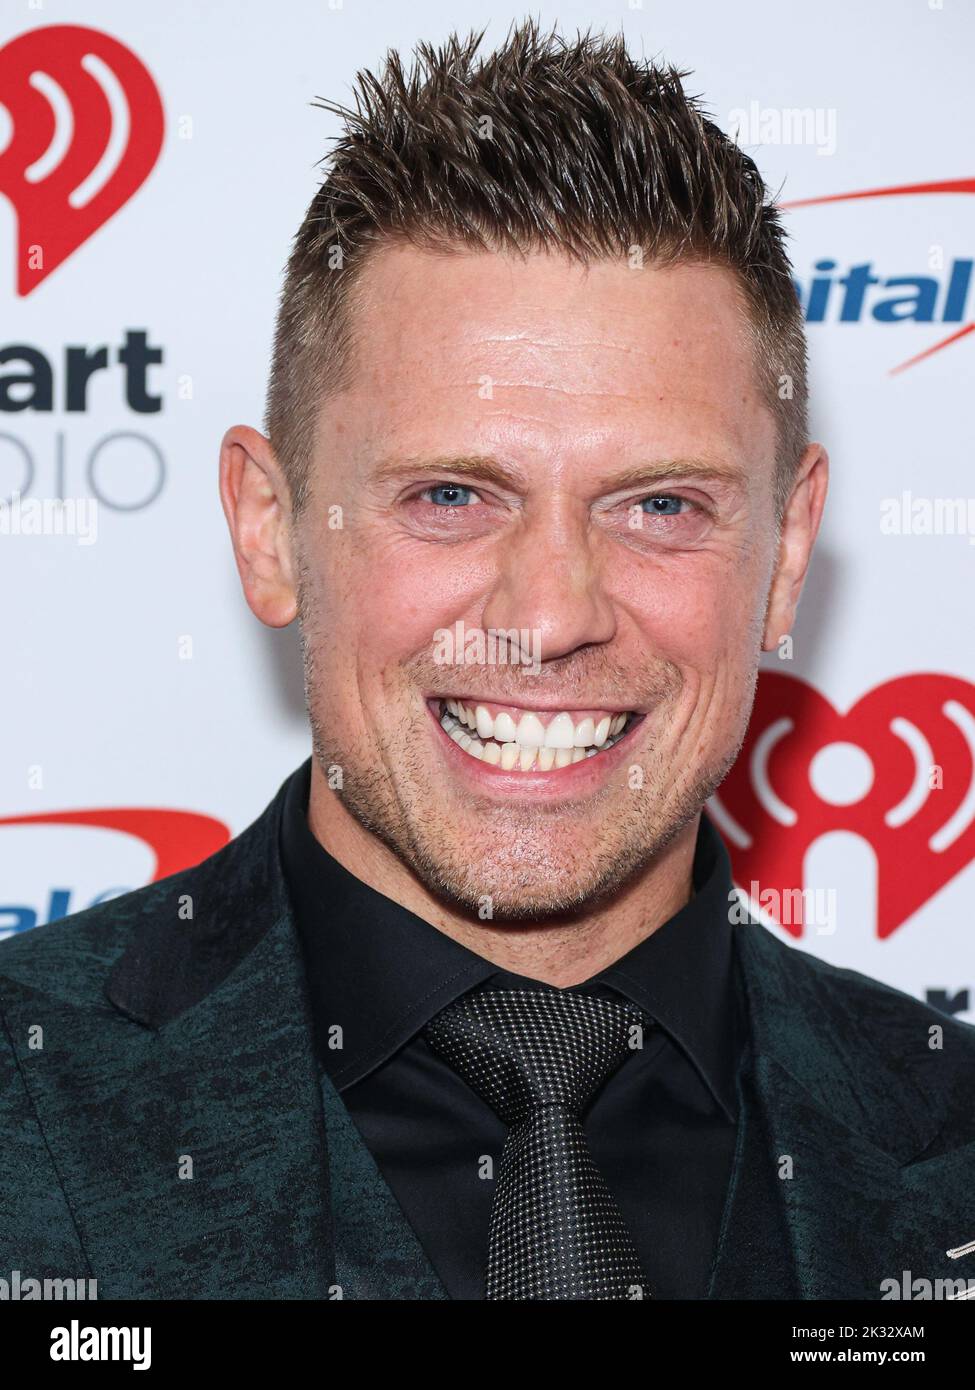 LAS VEGAS, NEVADA, USA - SEPTEMBER 23: The Miz poses in the press room at the 2022 iHeartRadio Music Festival - Night 1 held at the T-Mobile Arena on September 23, 2022 in Las Vegas, Nevada, United States. (Photo by Xavier Collin/Image Press Agency) Stock Photo